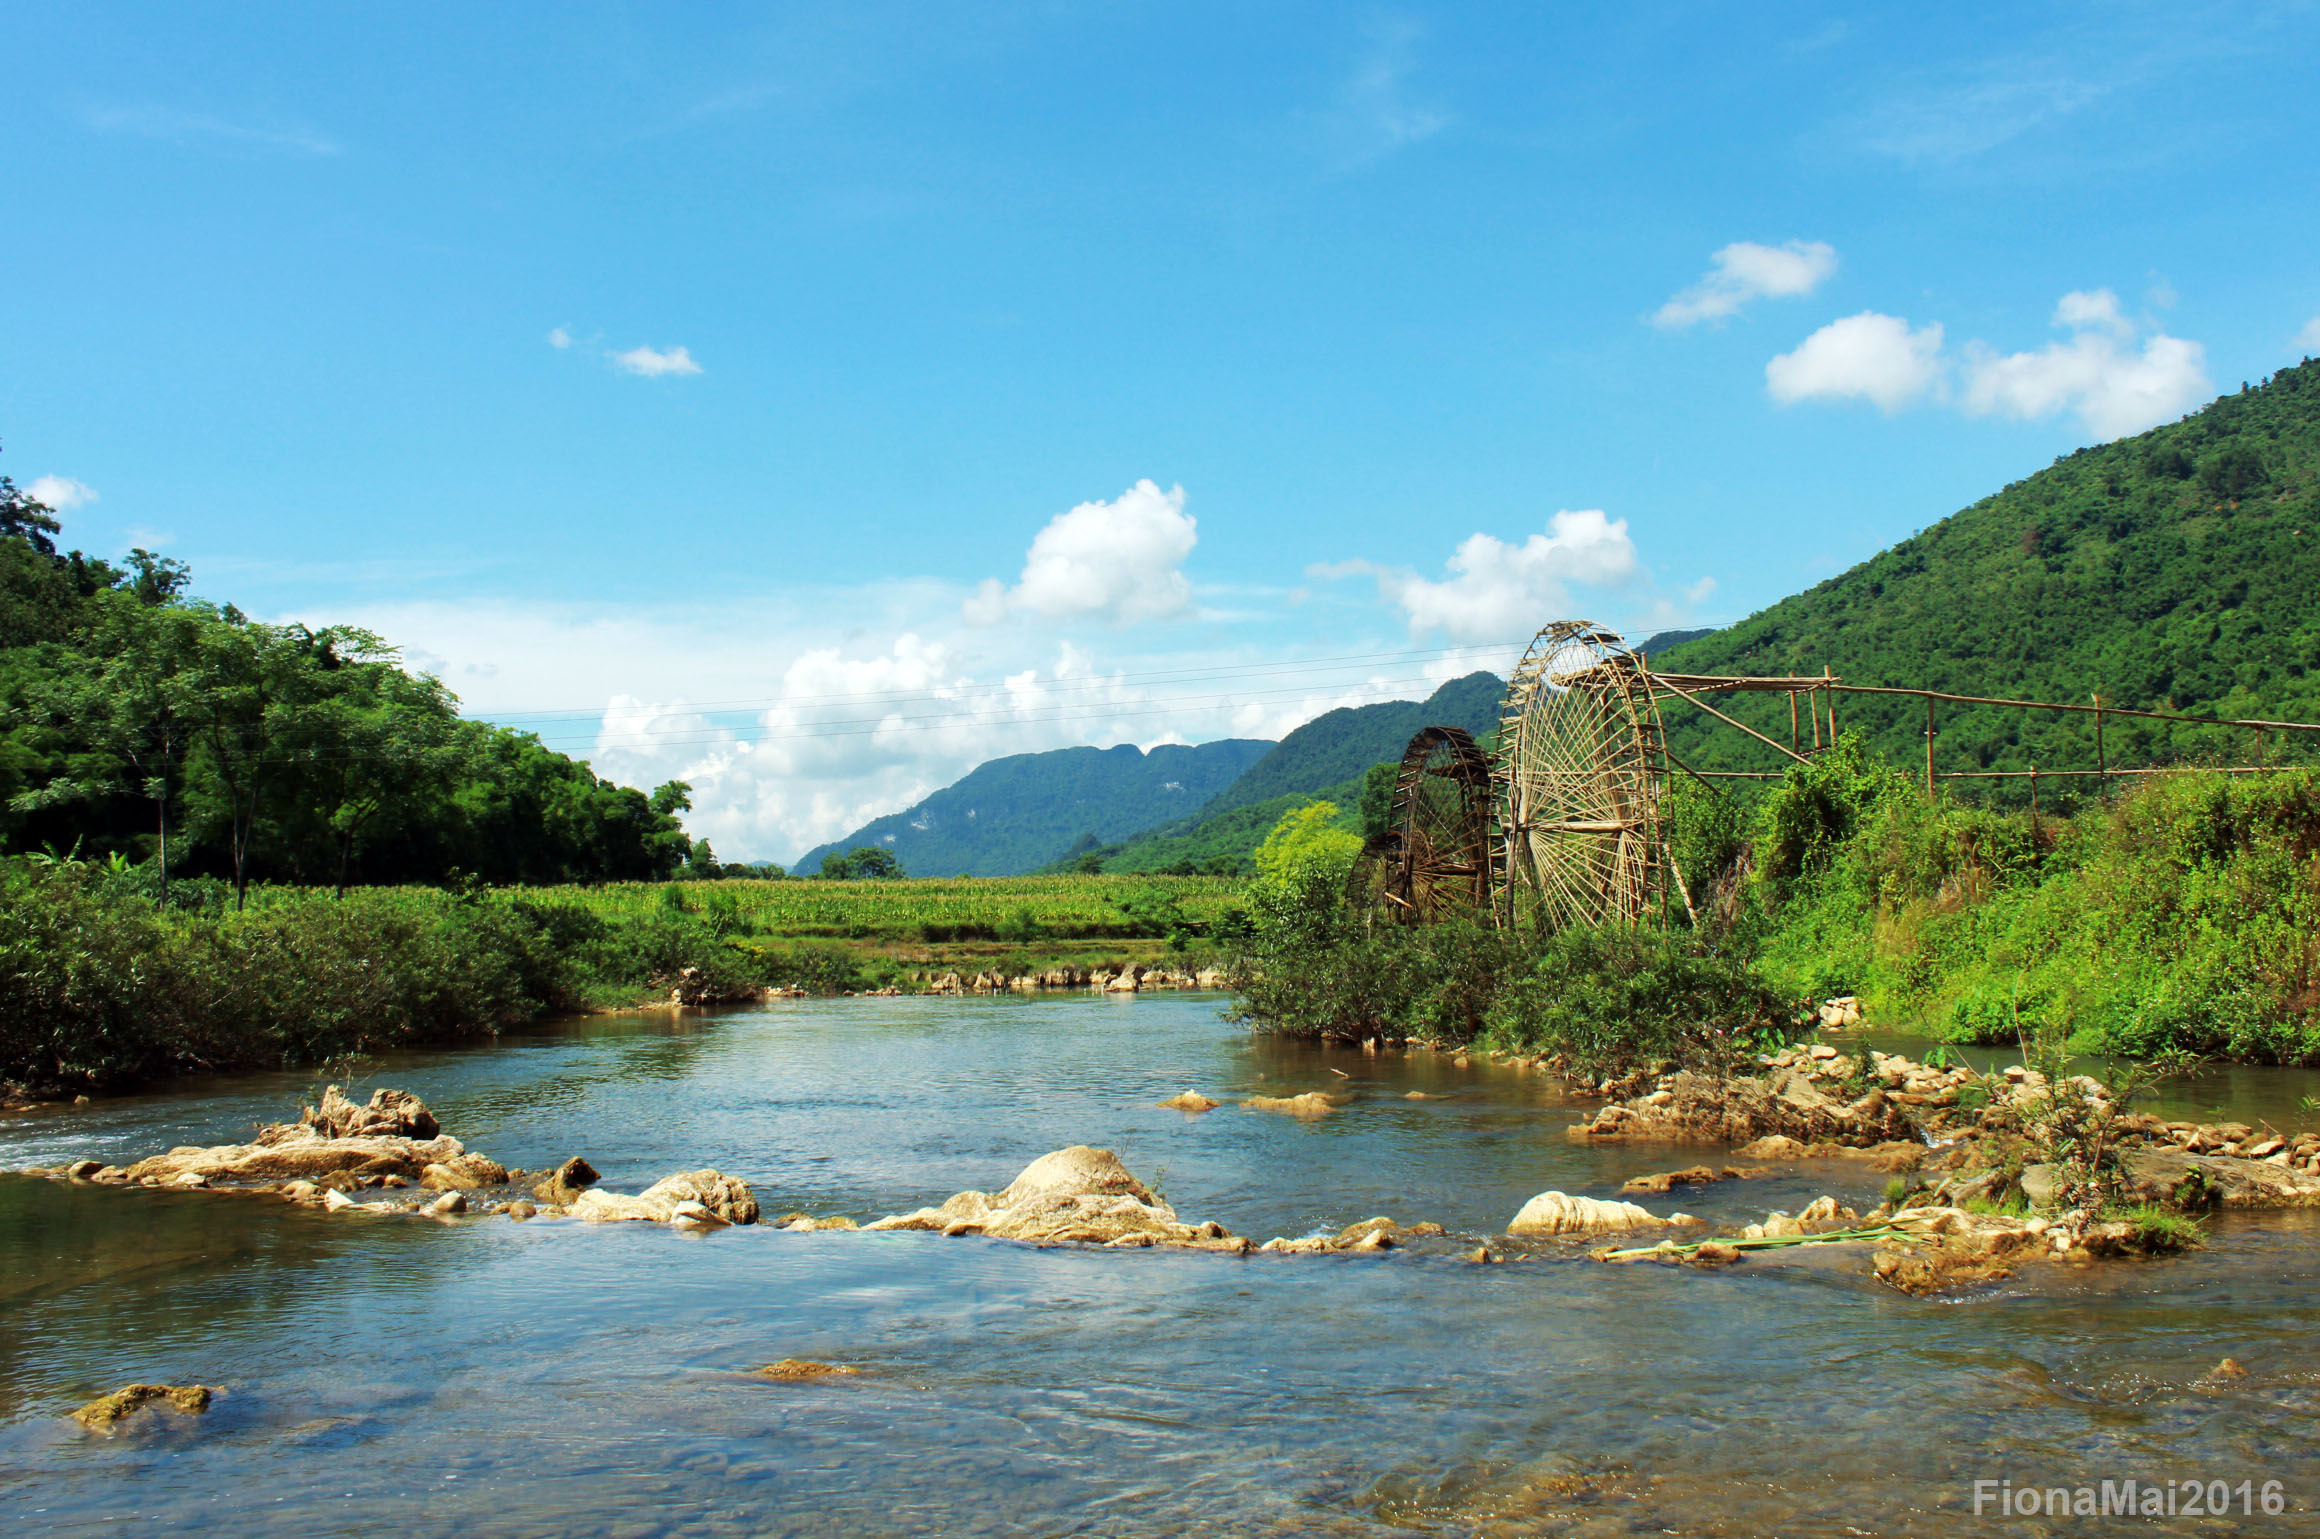 Top 6 Vietnam off the beaten track destinations selected by locals